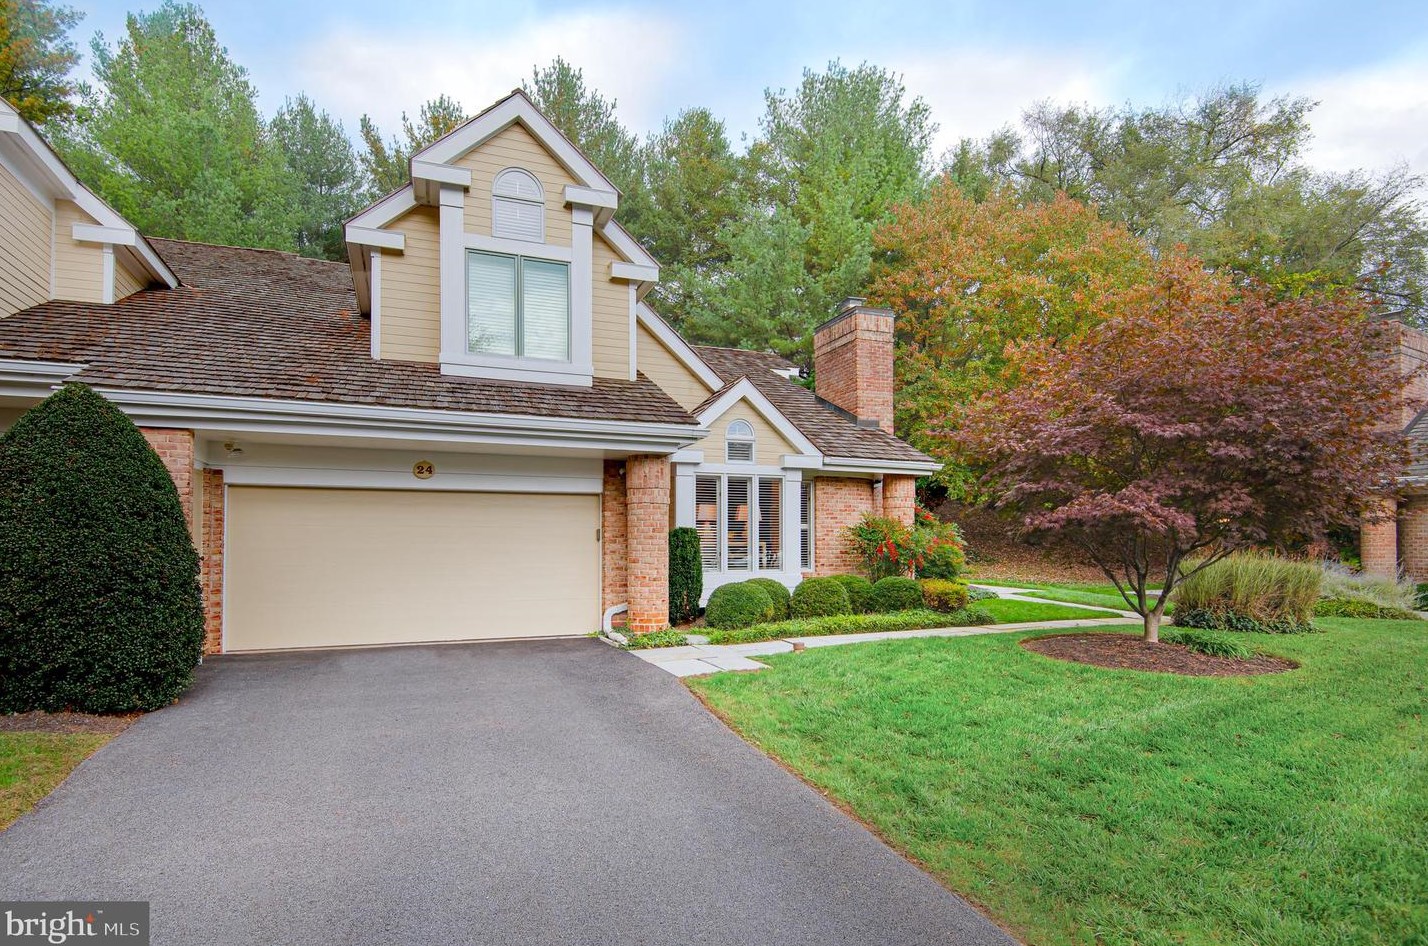 24 Old Boxwood Ln, Lutherville Timonium, MD 21093